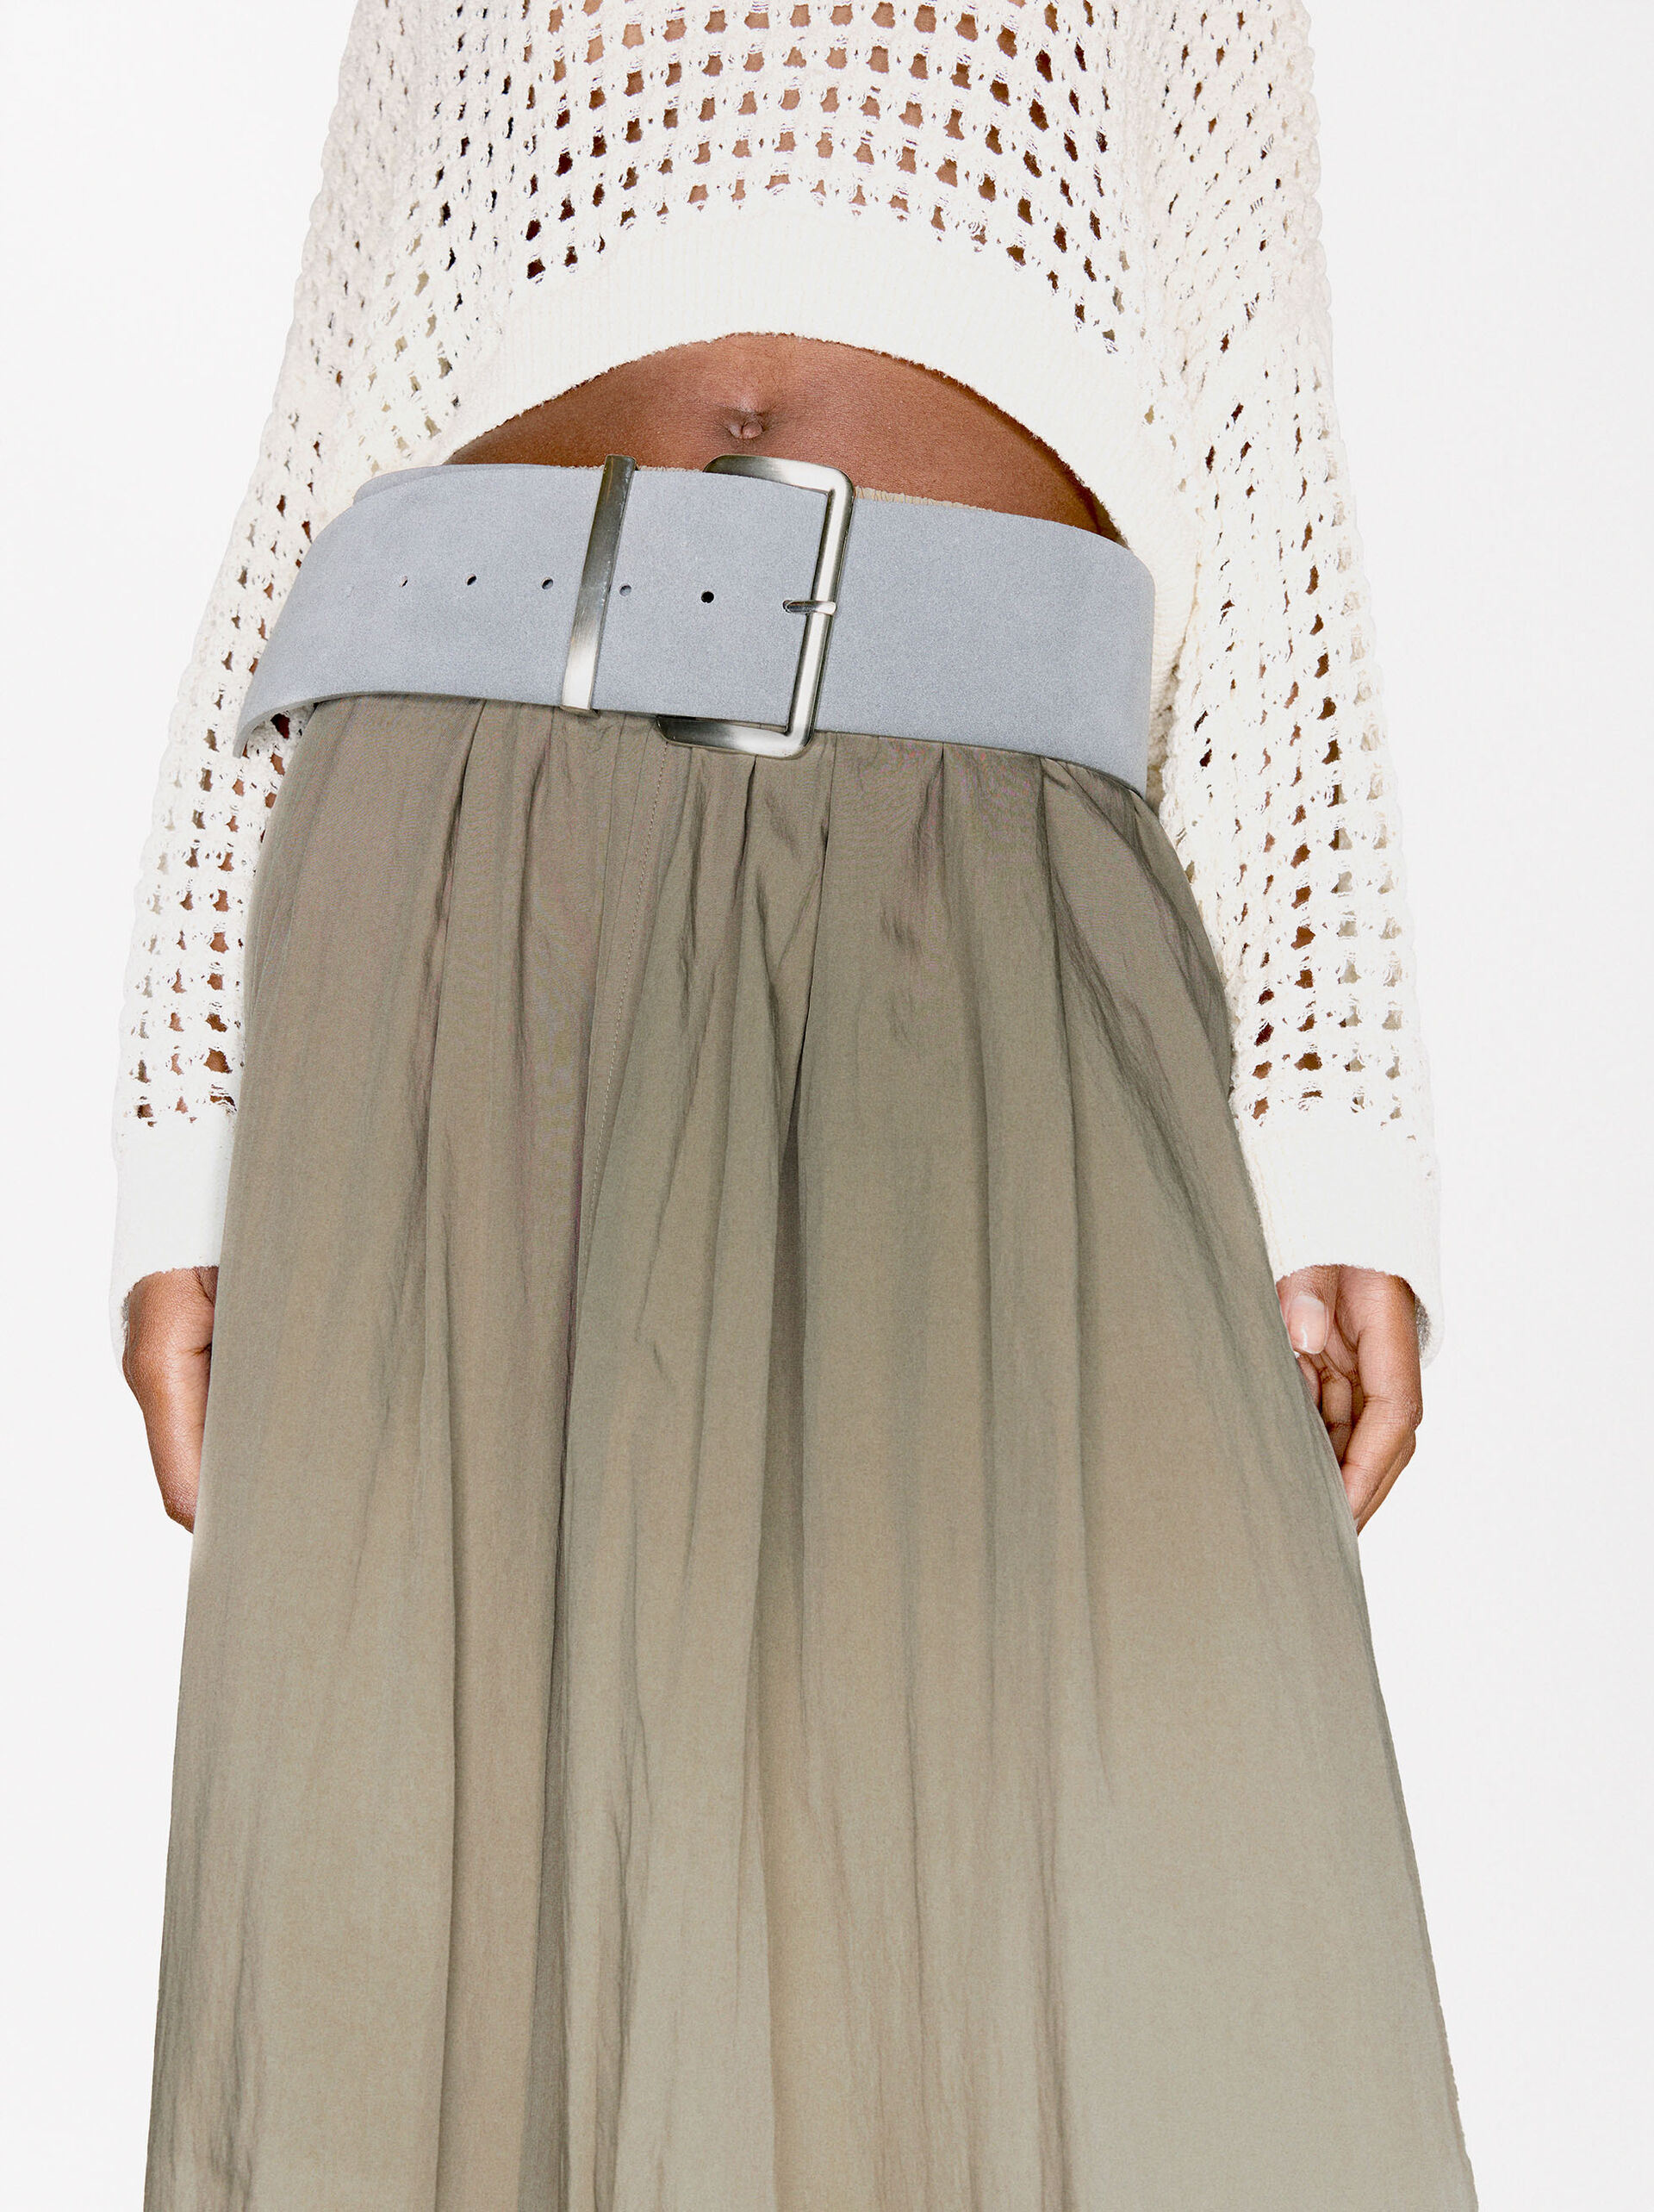 Long Skirt With Elastic Waistband image number 3.0